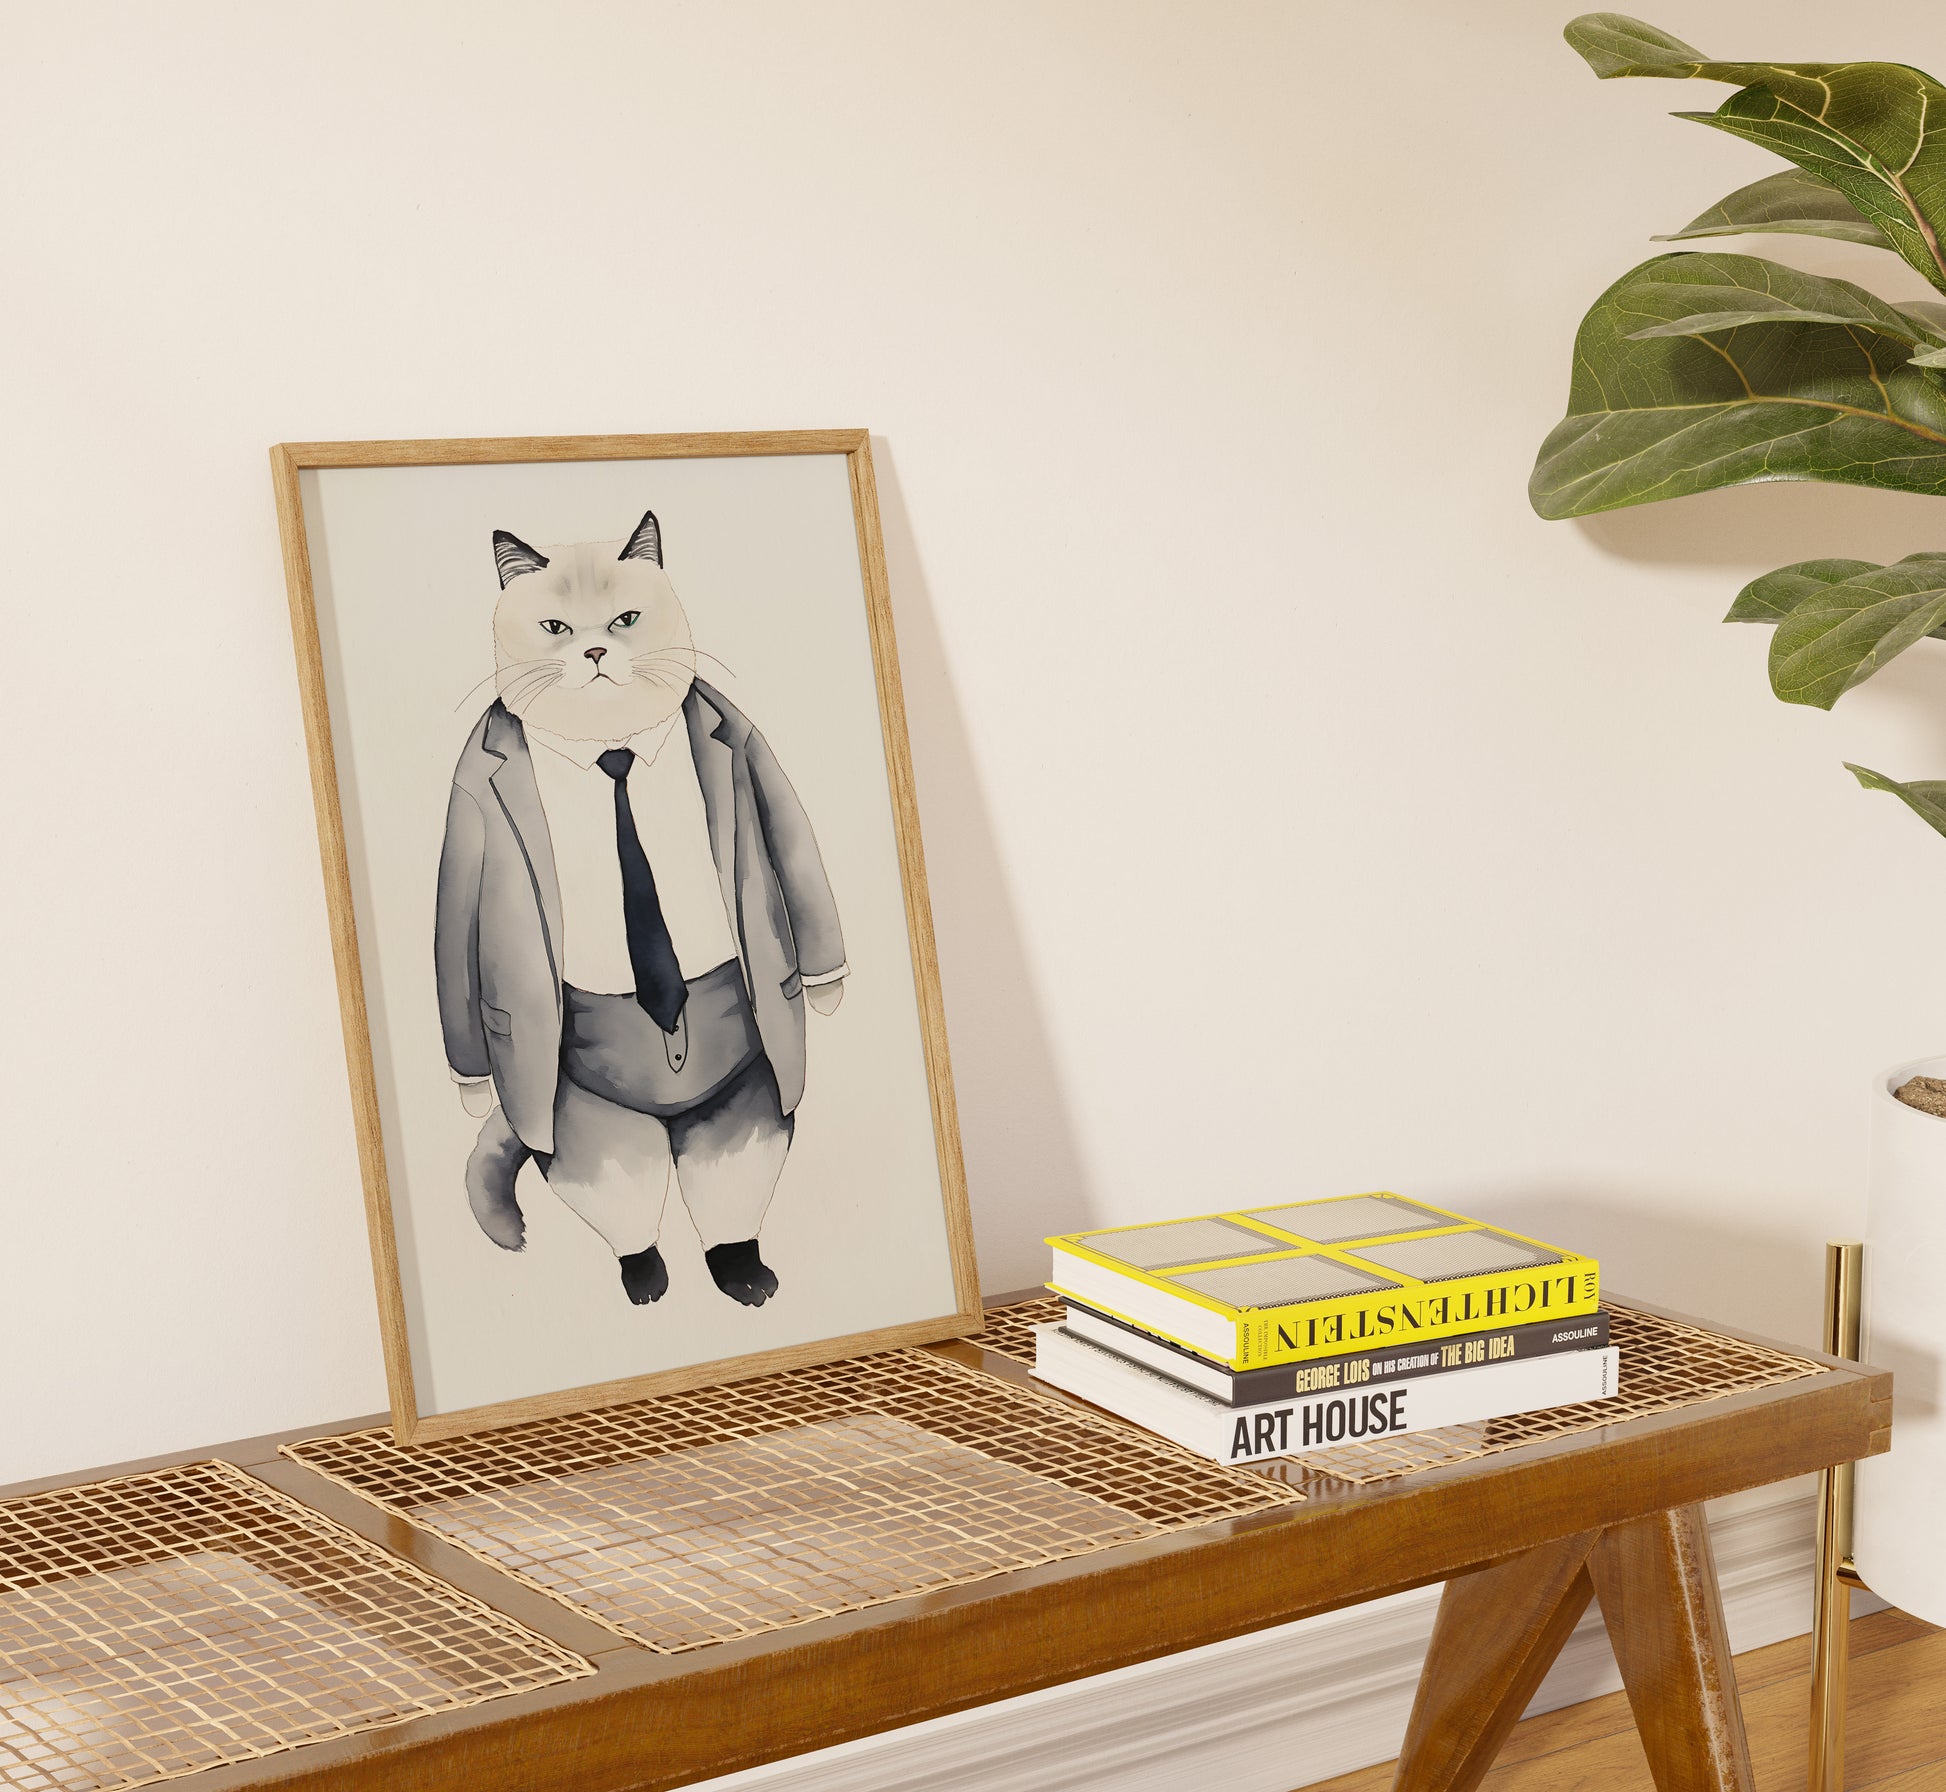 A framed illustration of a cat in a suit on a shelf beside books.